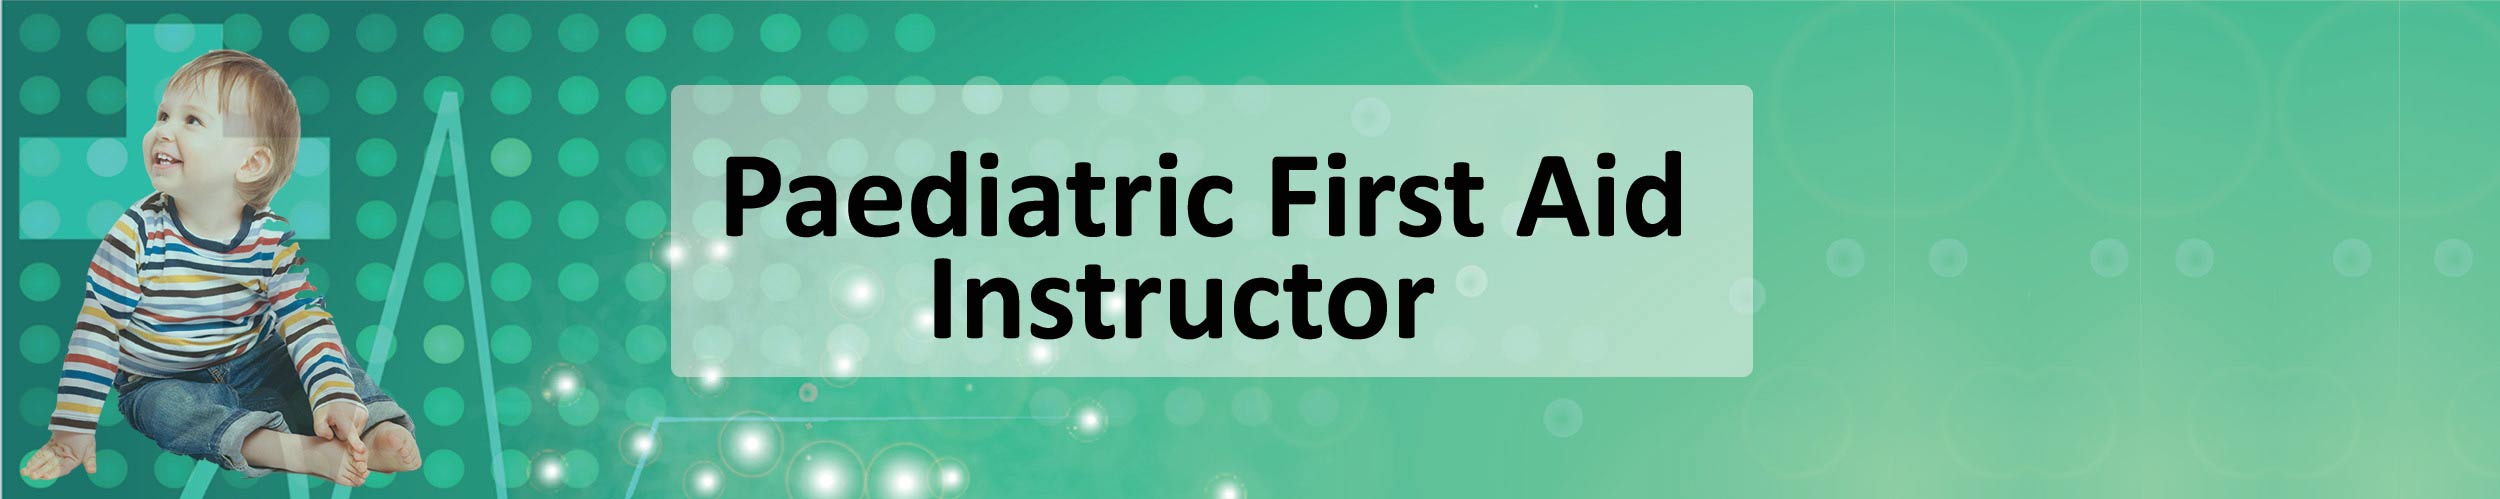 paediatric first aid instructor banner